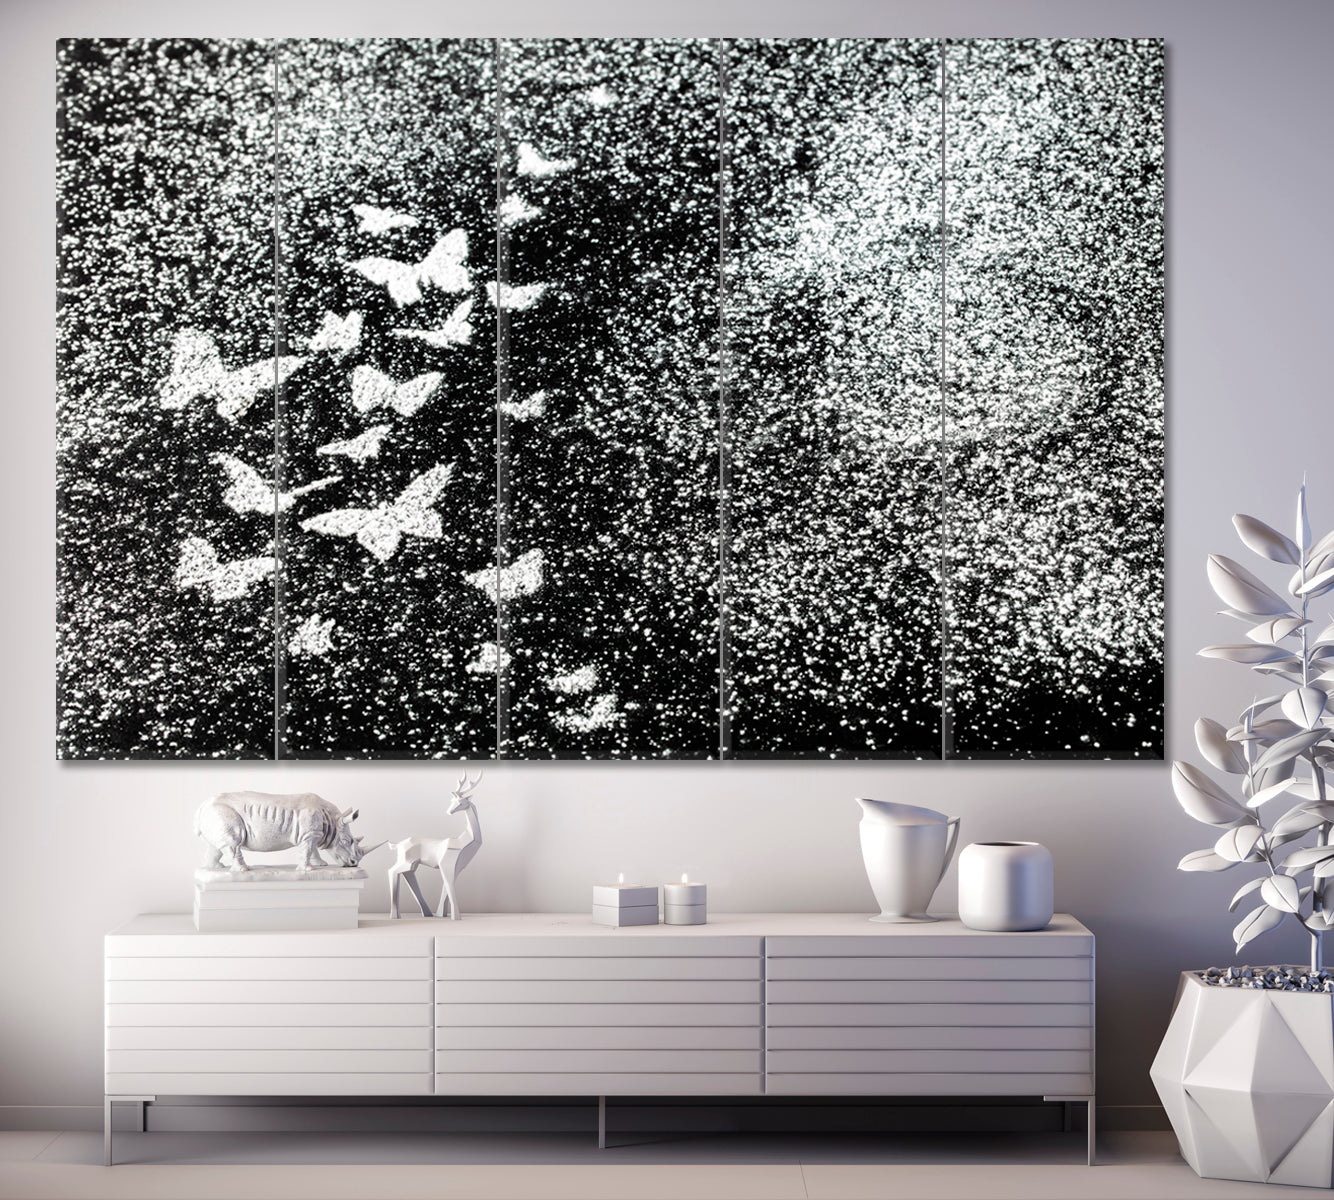 BUTTERFLY Black And White Beautiful Tender Canvas Print Black and White Wall Art Print Artesty 5 panels 36" x 24" 